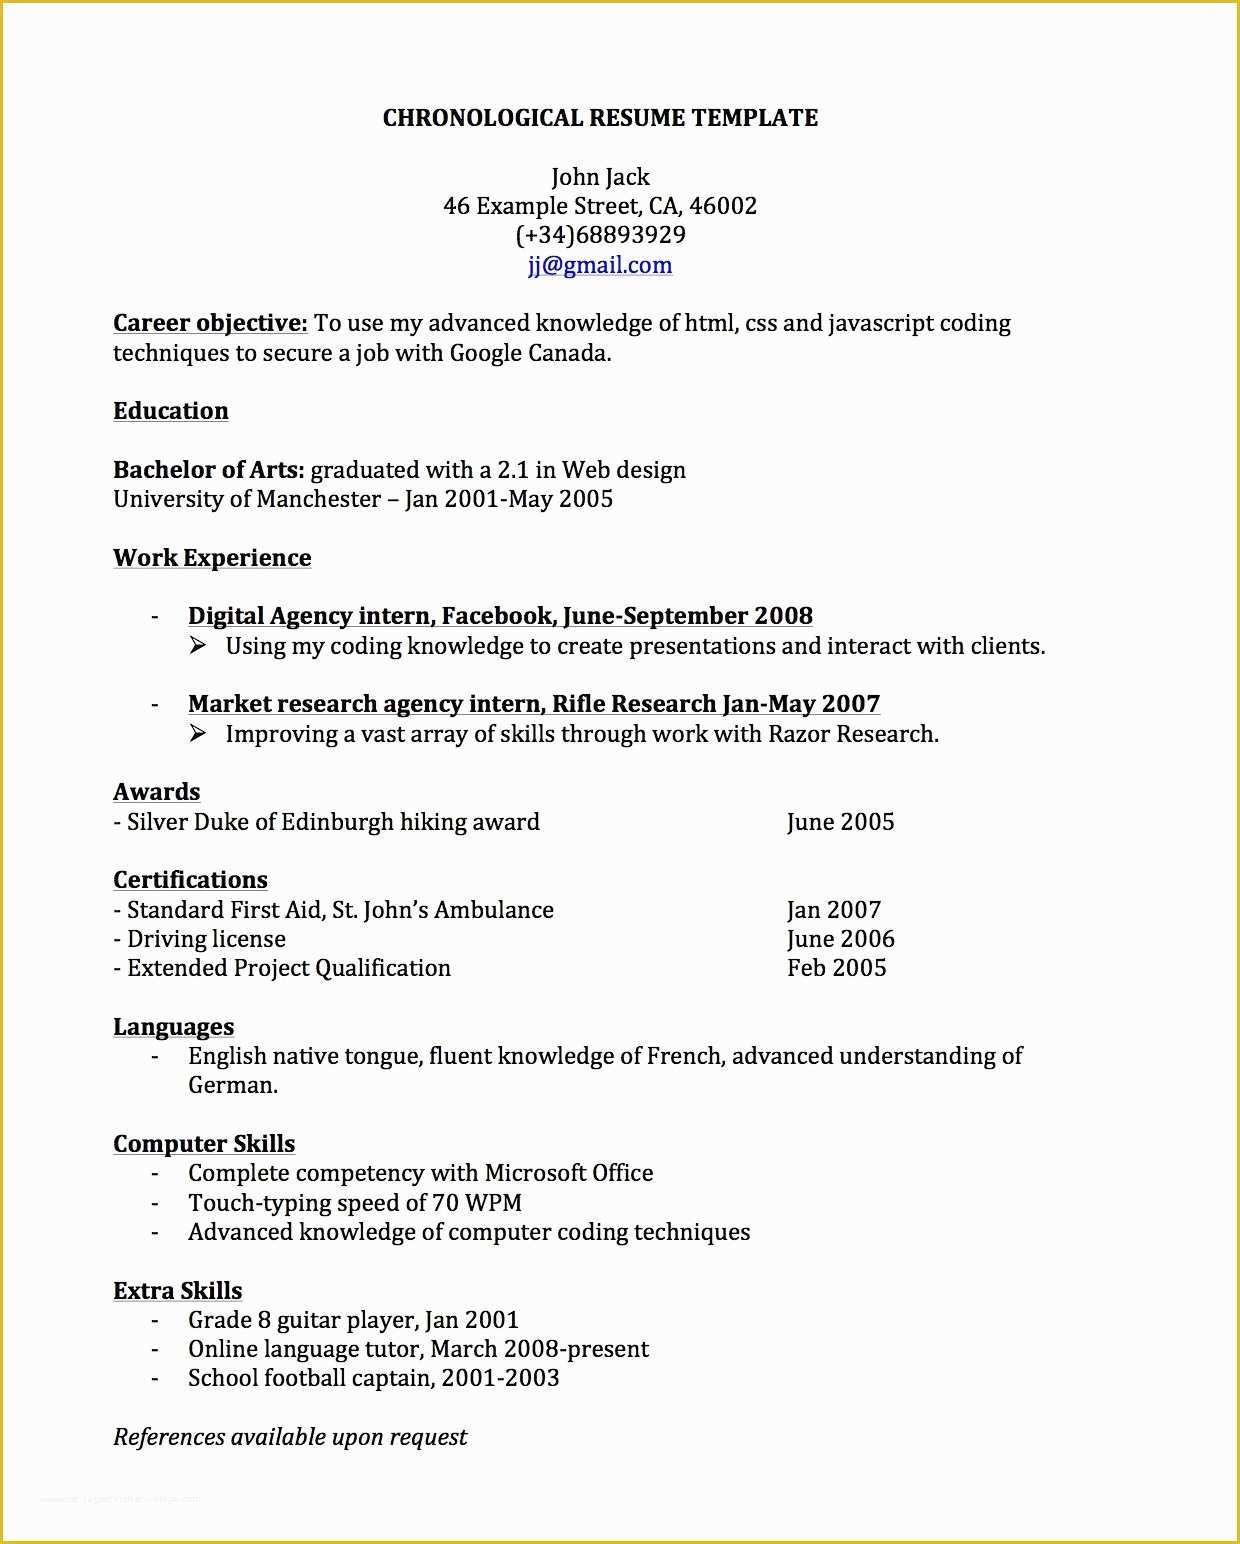 Free Resume Outline Template Of Chronological Resume for Canada